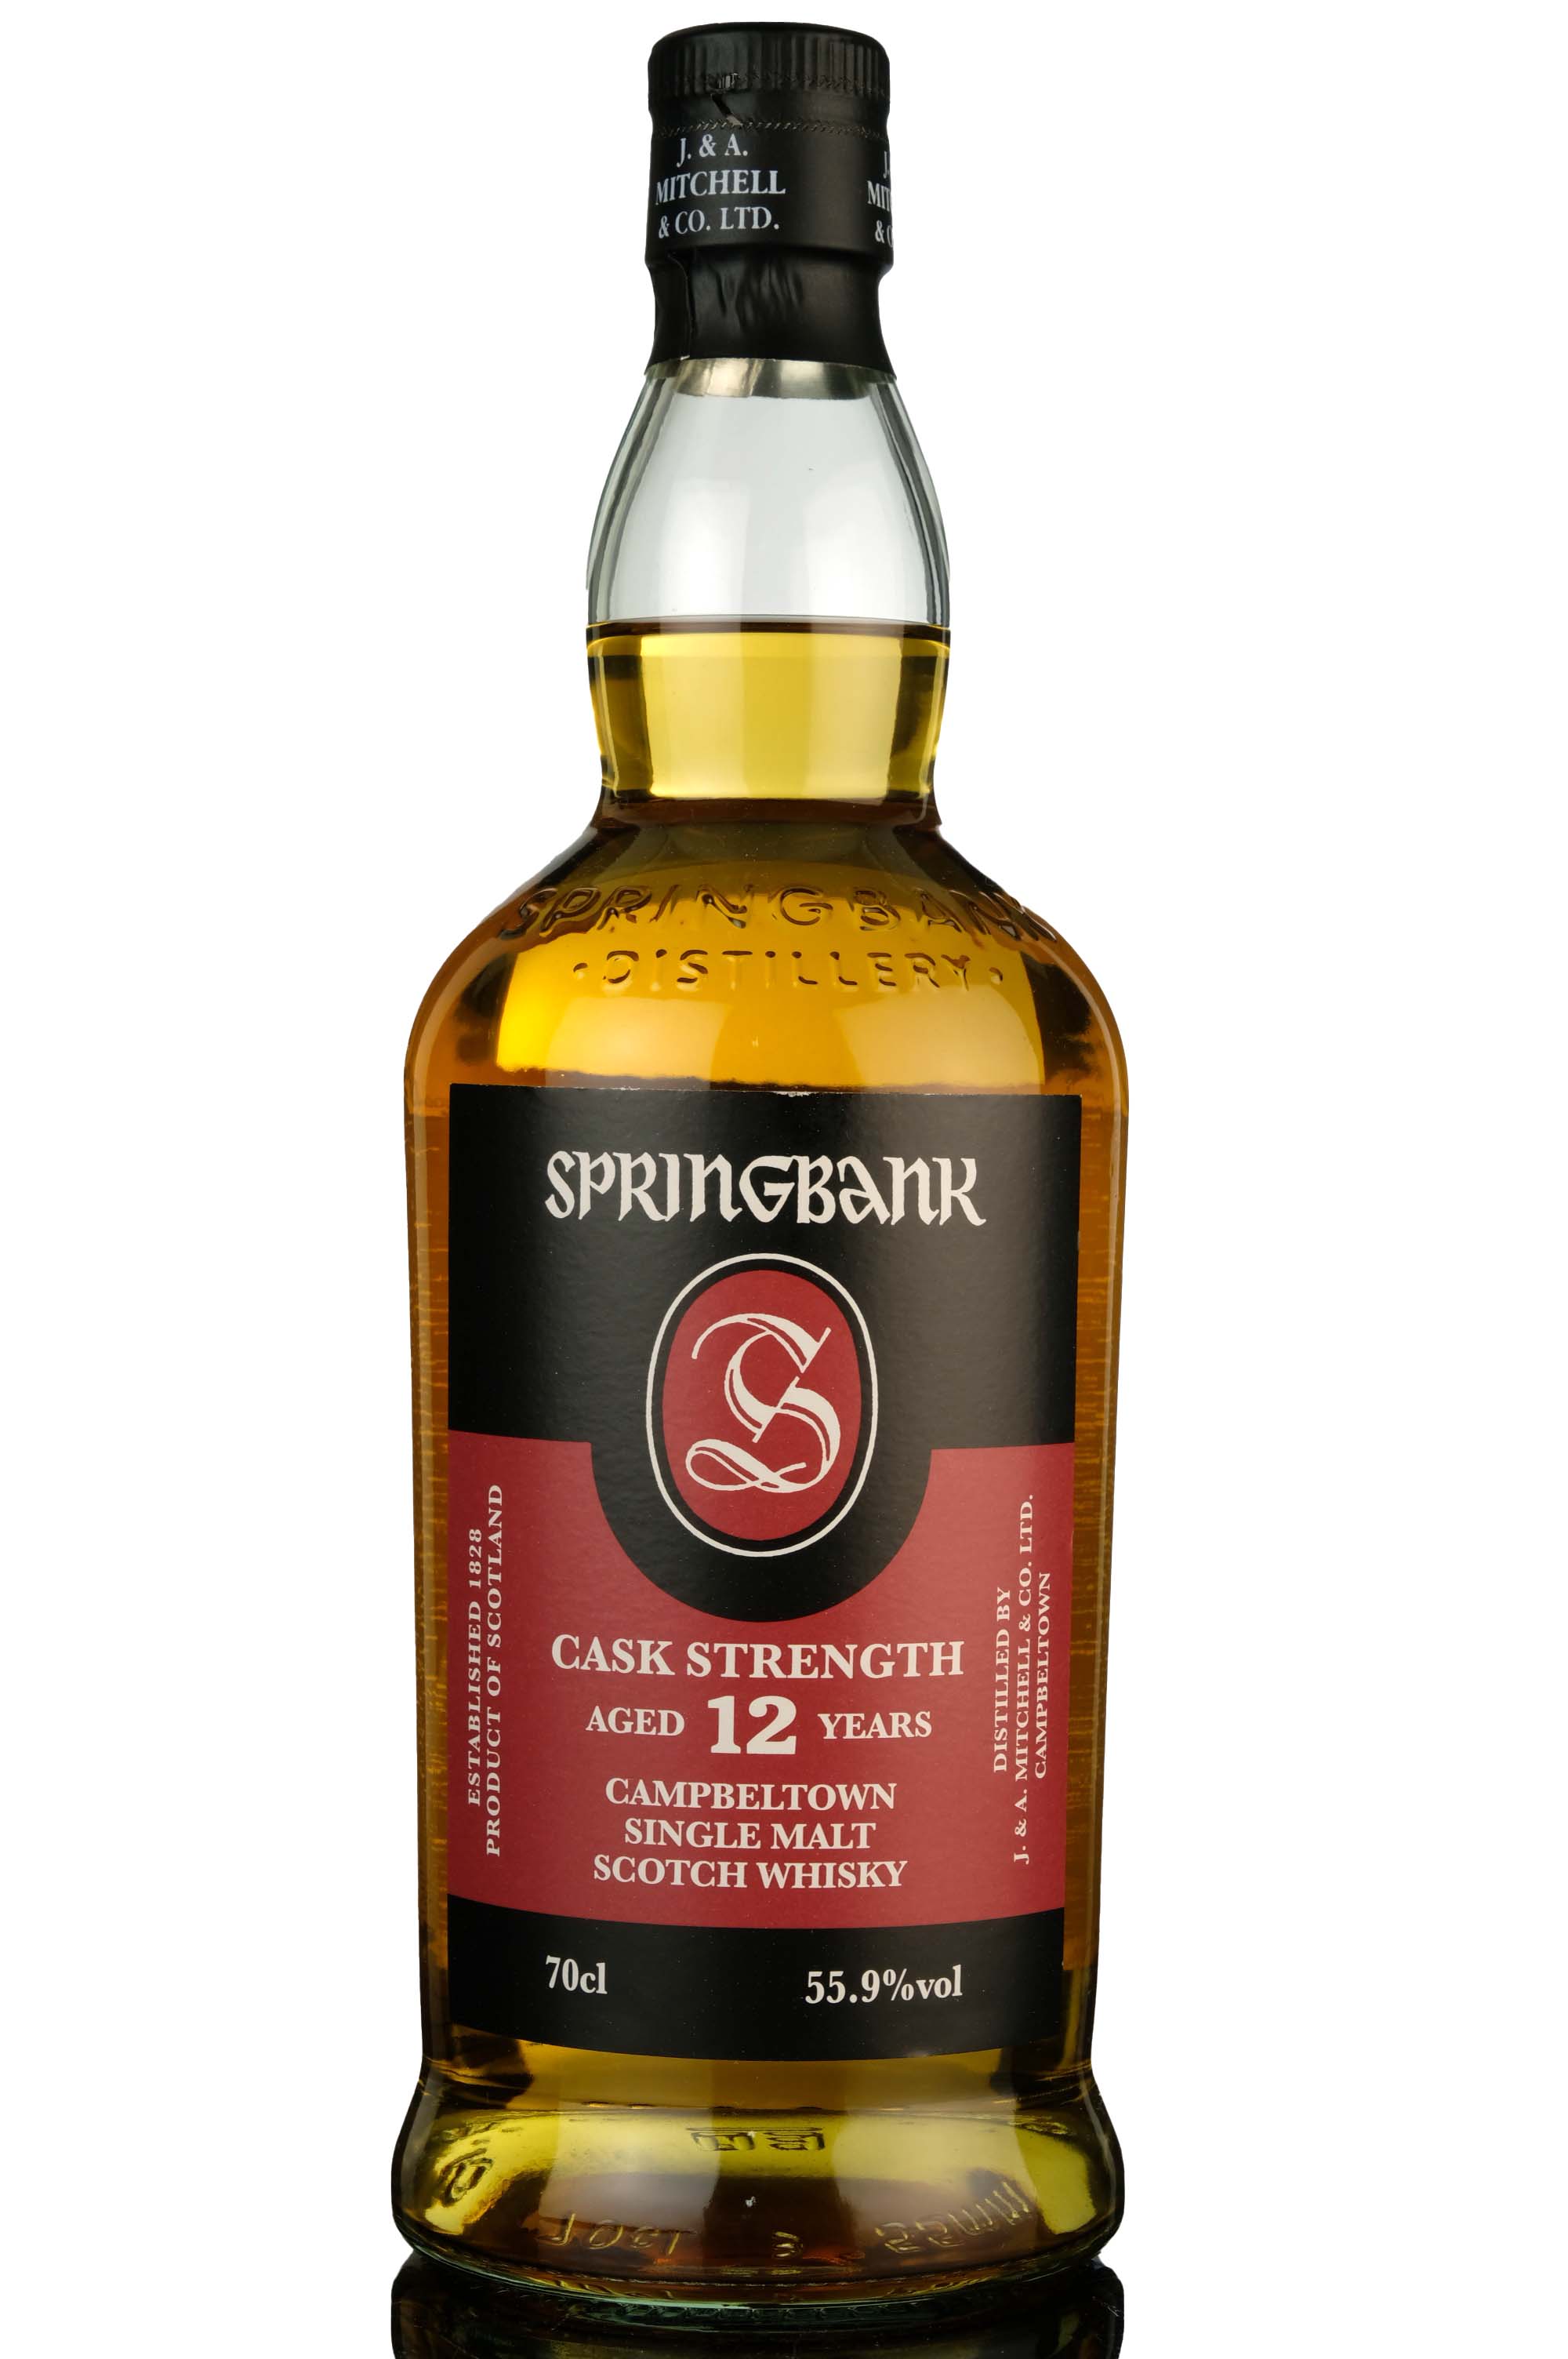 Springbank 12 Year Old - Cask Strength 55.9% - 2021 Release